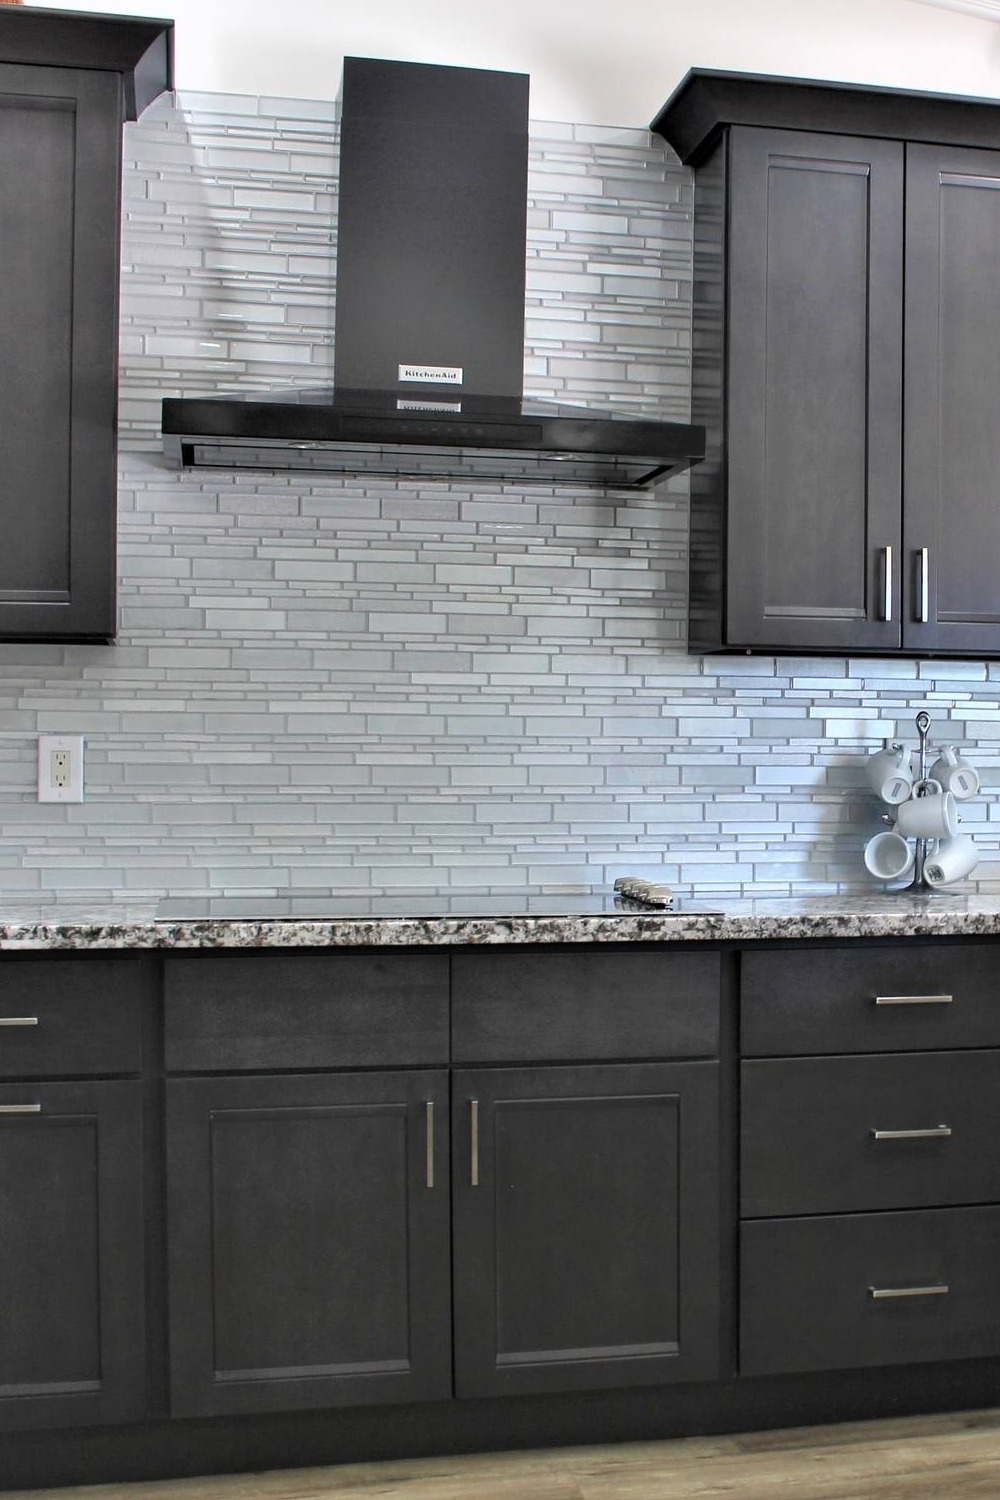 Recessed Panels Cabinets Modern Styles White Cabinets Gray Kitchens Darker Version Subway Tiles